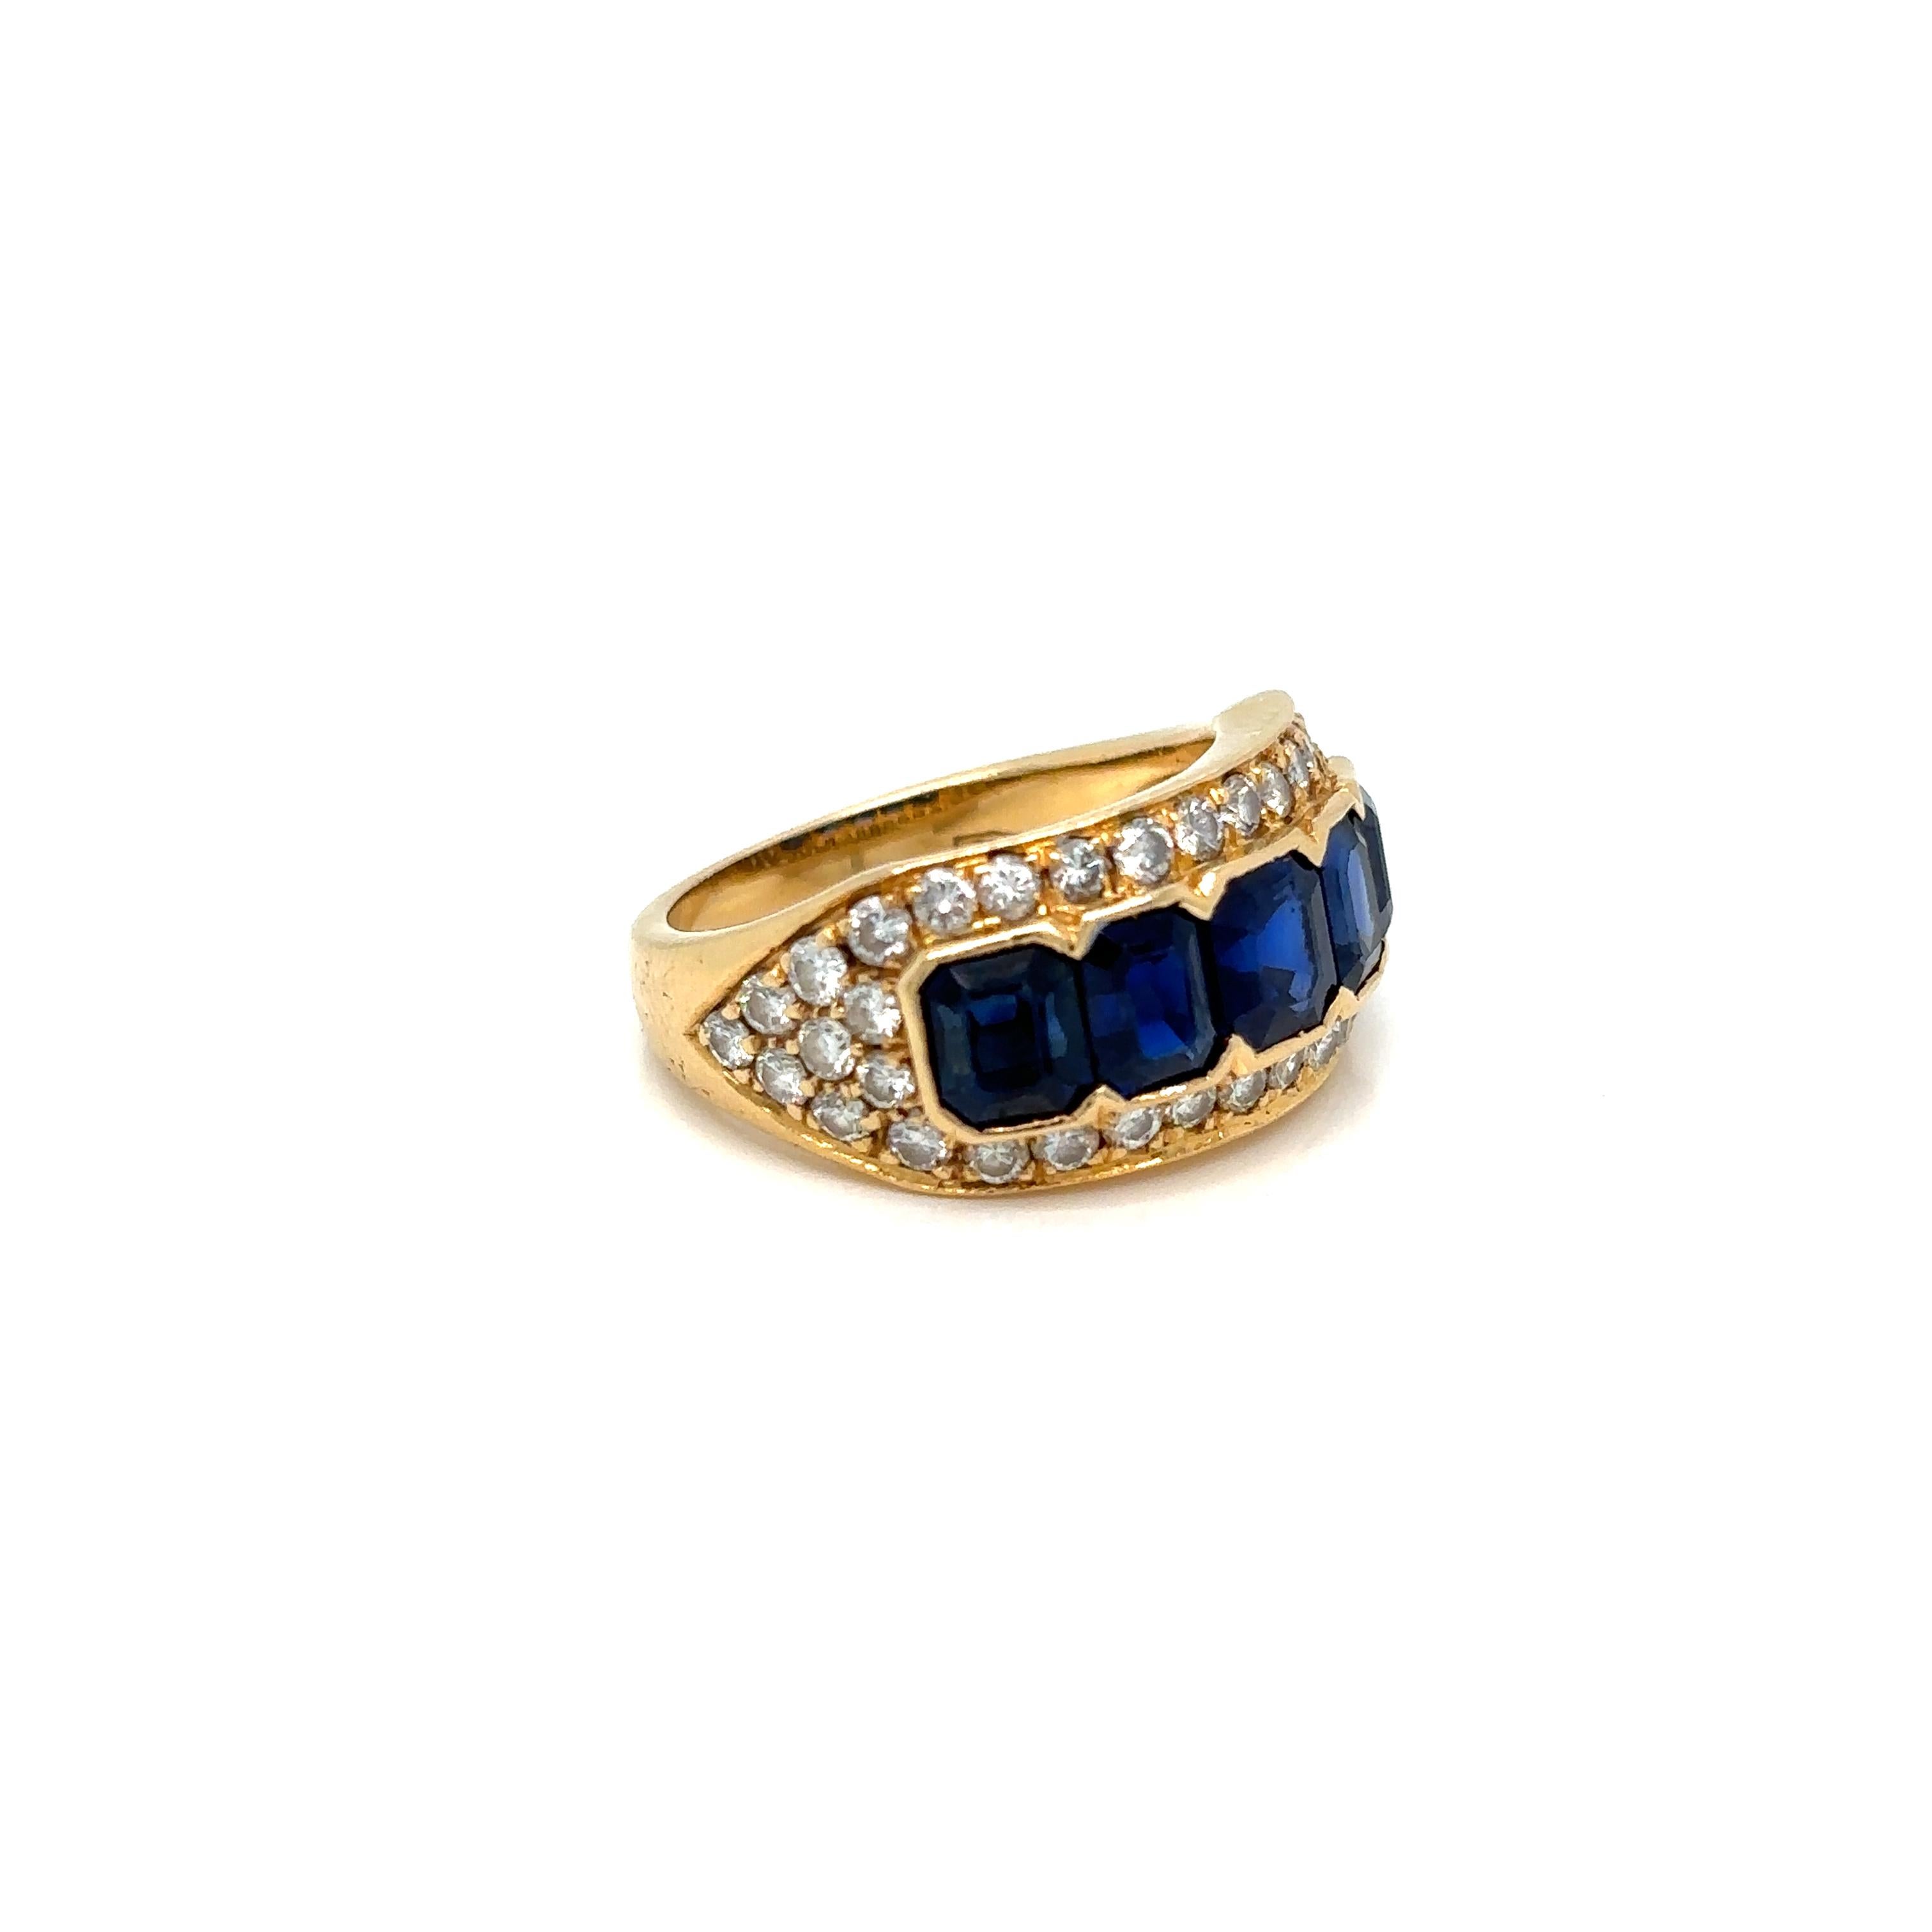 Illario 5 Carat Natural Sapphire Diamond Band Ring In Excellent Condition For Sale In Napoli, Italy